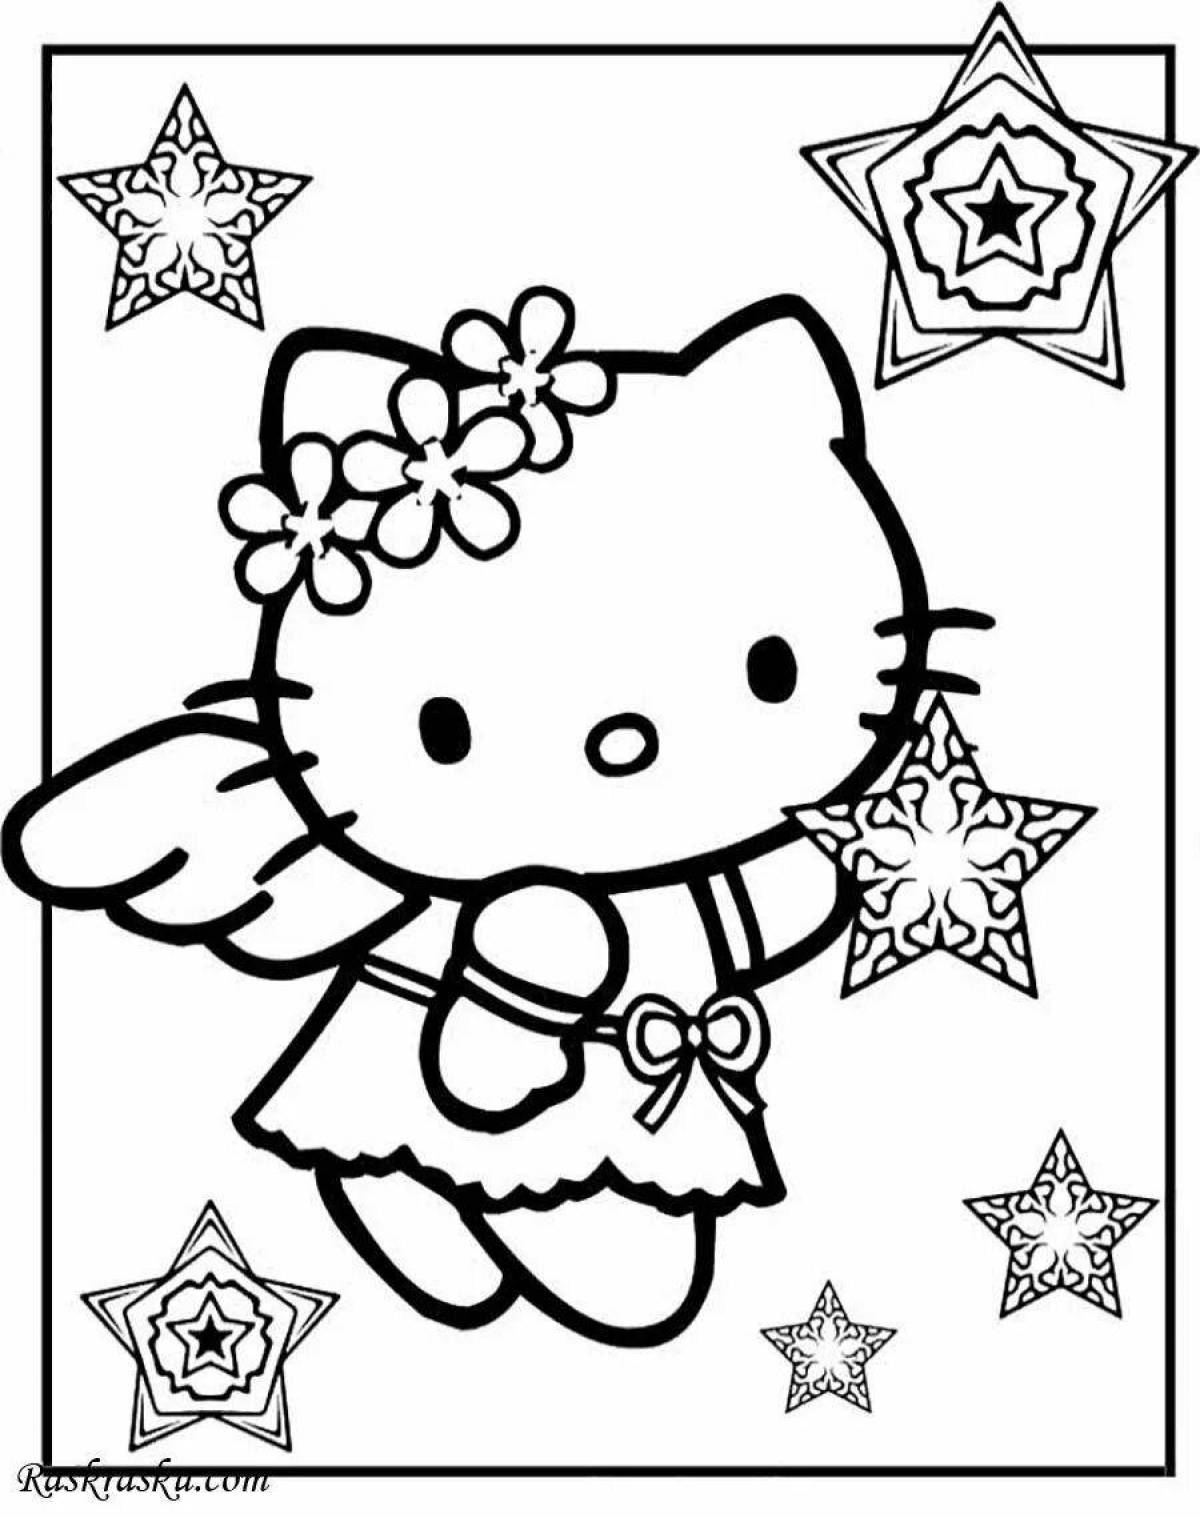 Cute aster kitty coloring book